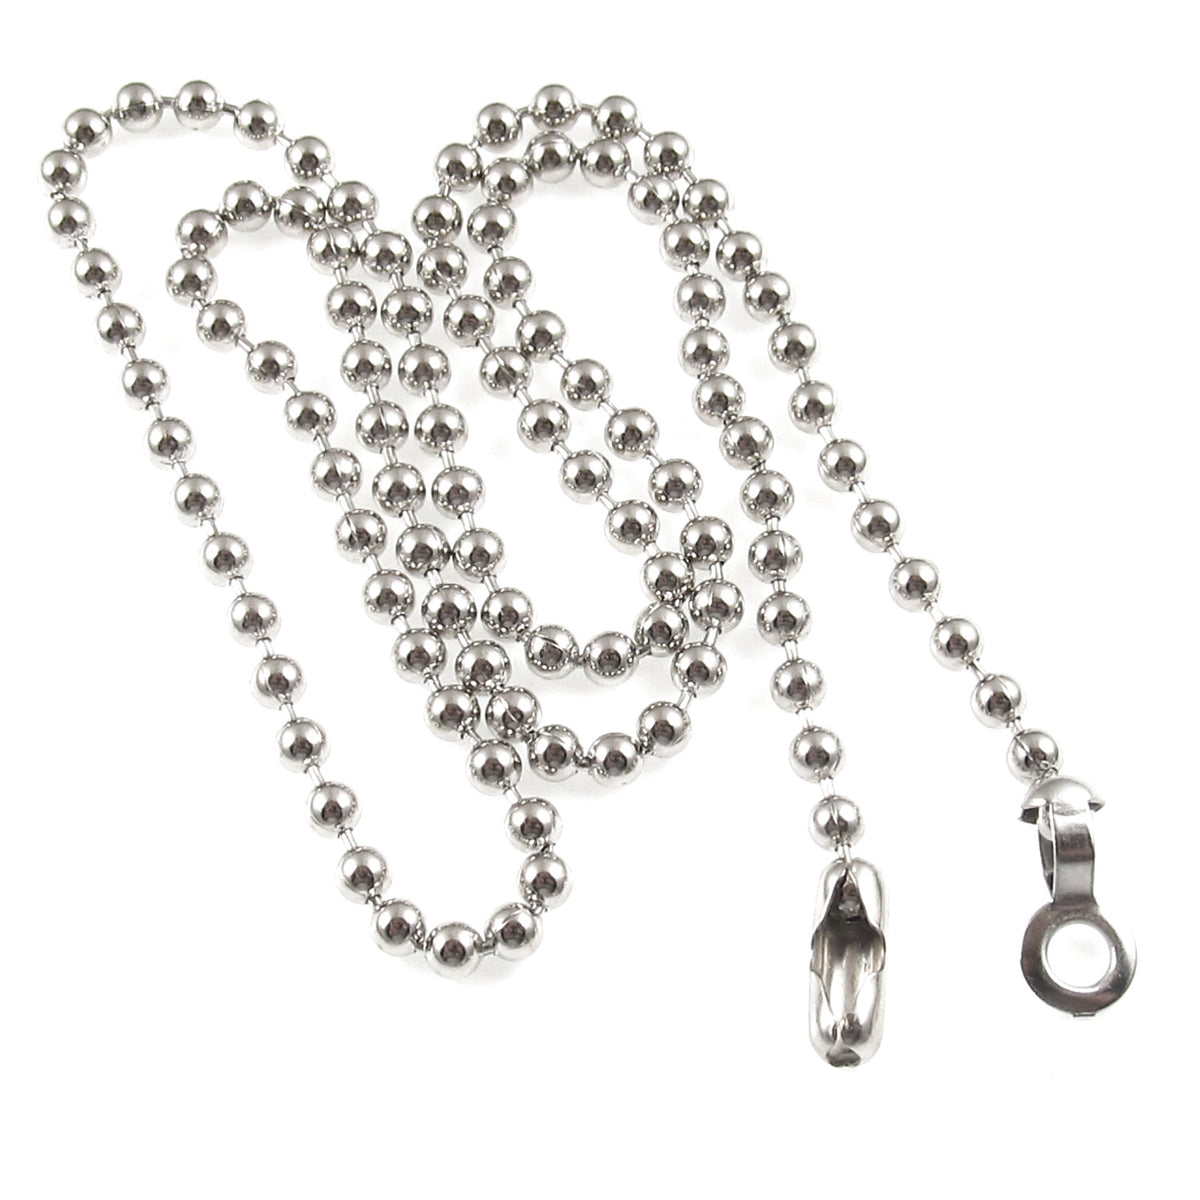 Vintage Stainless Steel Ball Chain Necklace Findings